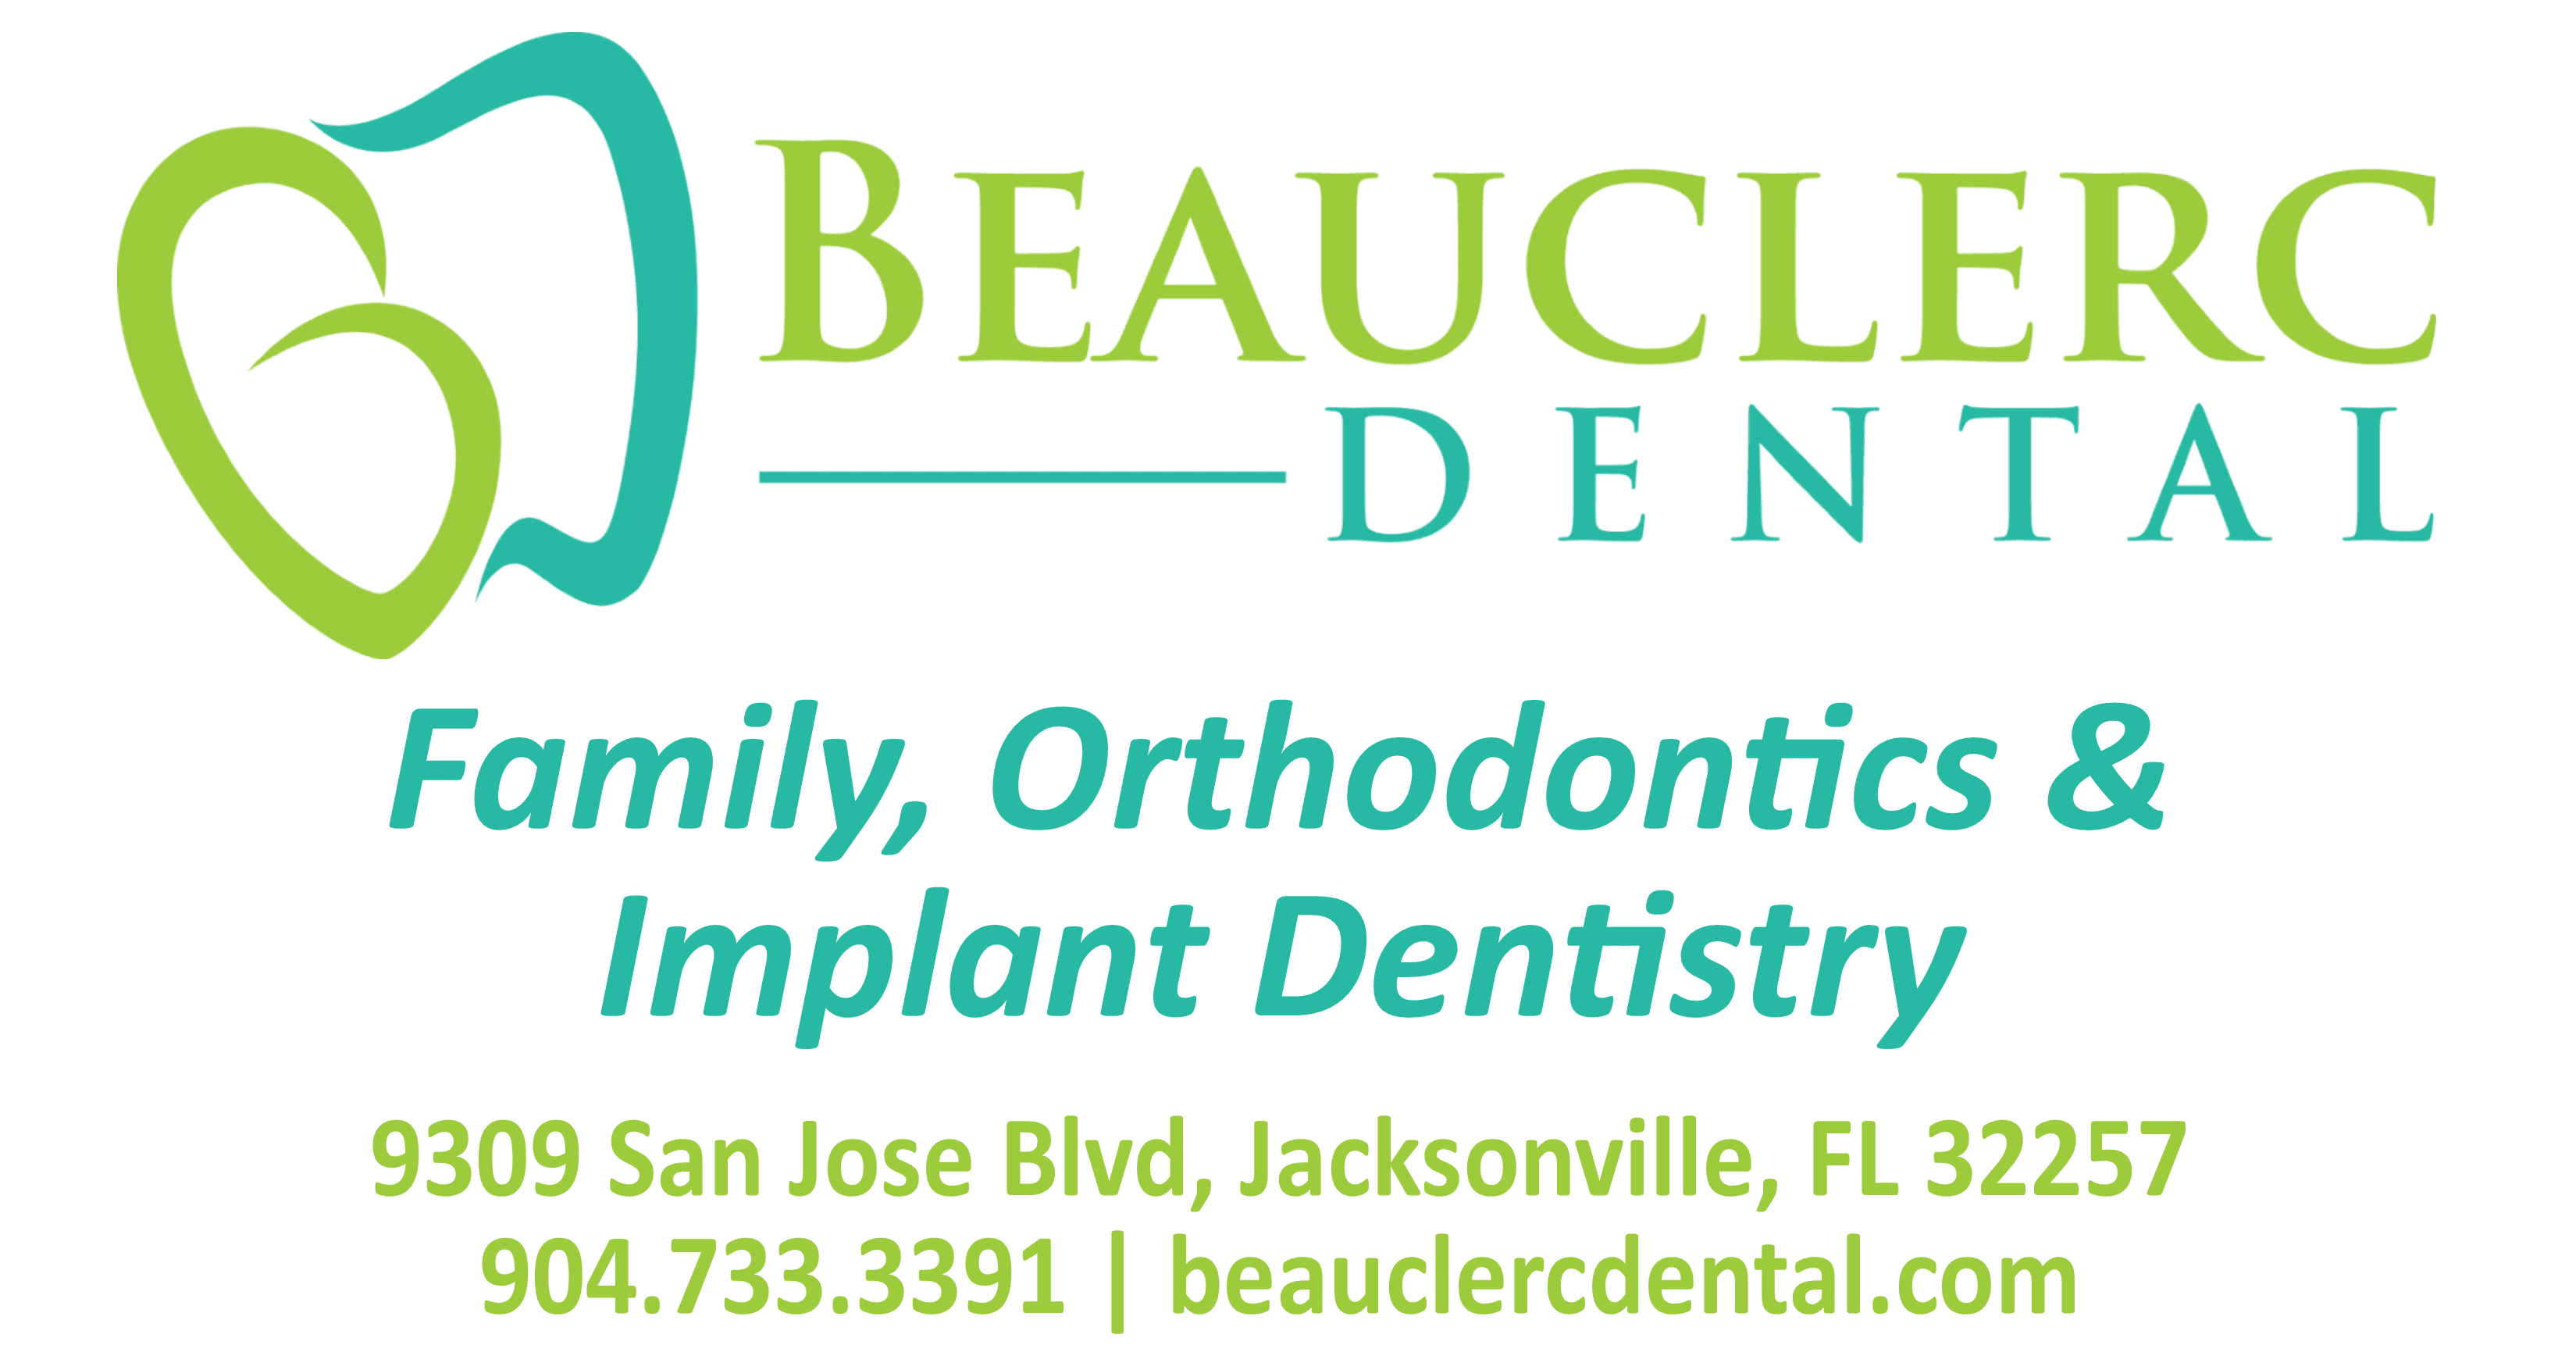 Beauclerc Dental with phone website and address